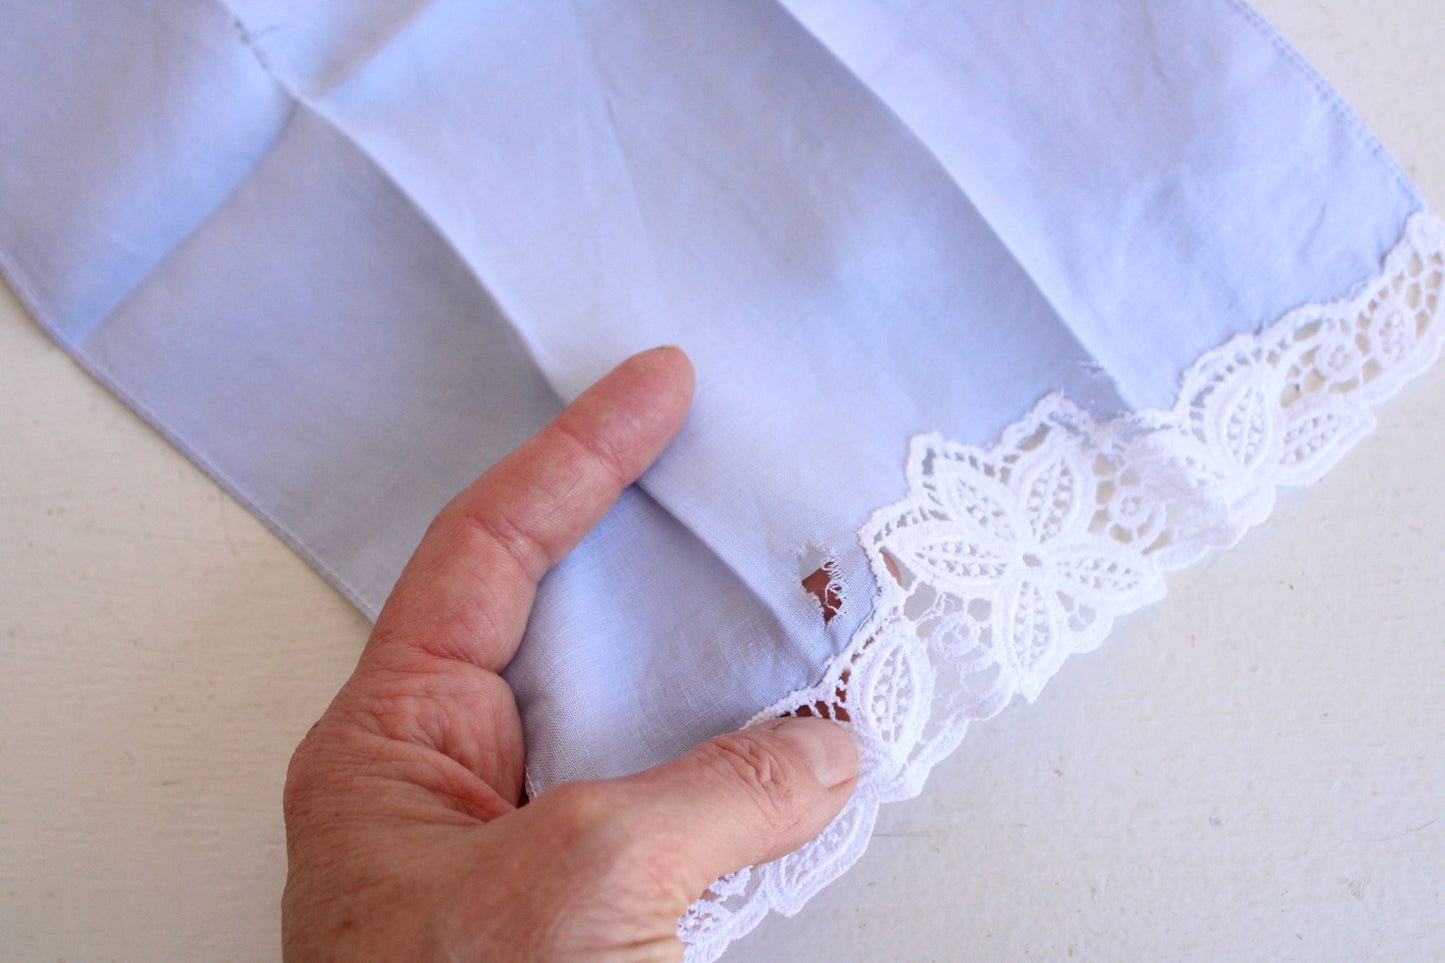 Vintage Two Linen Fingertip Towels, Blue with White Lace Trim